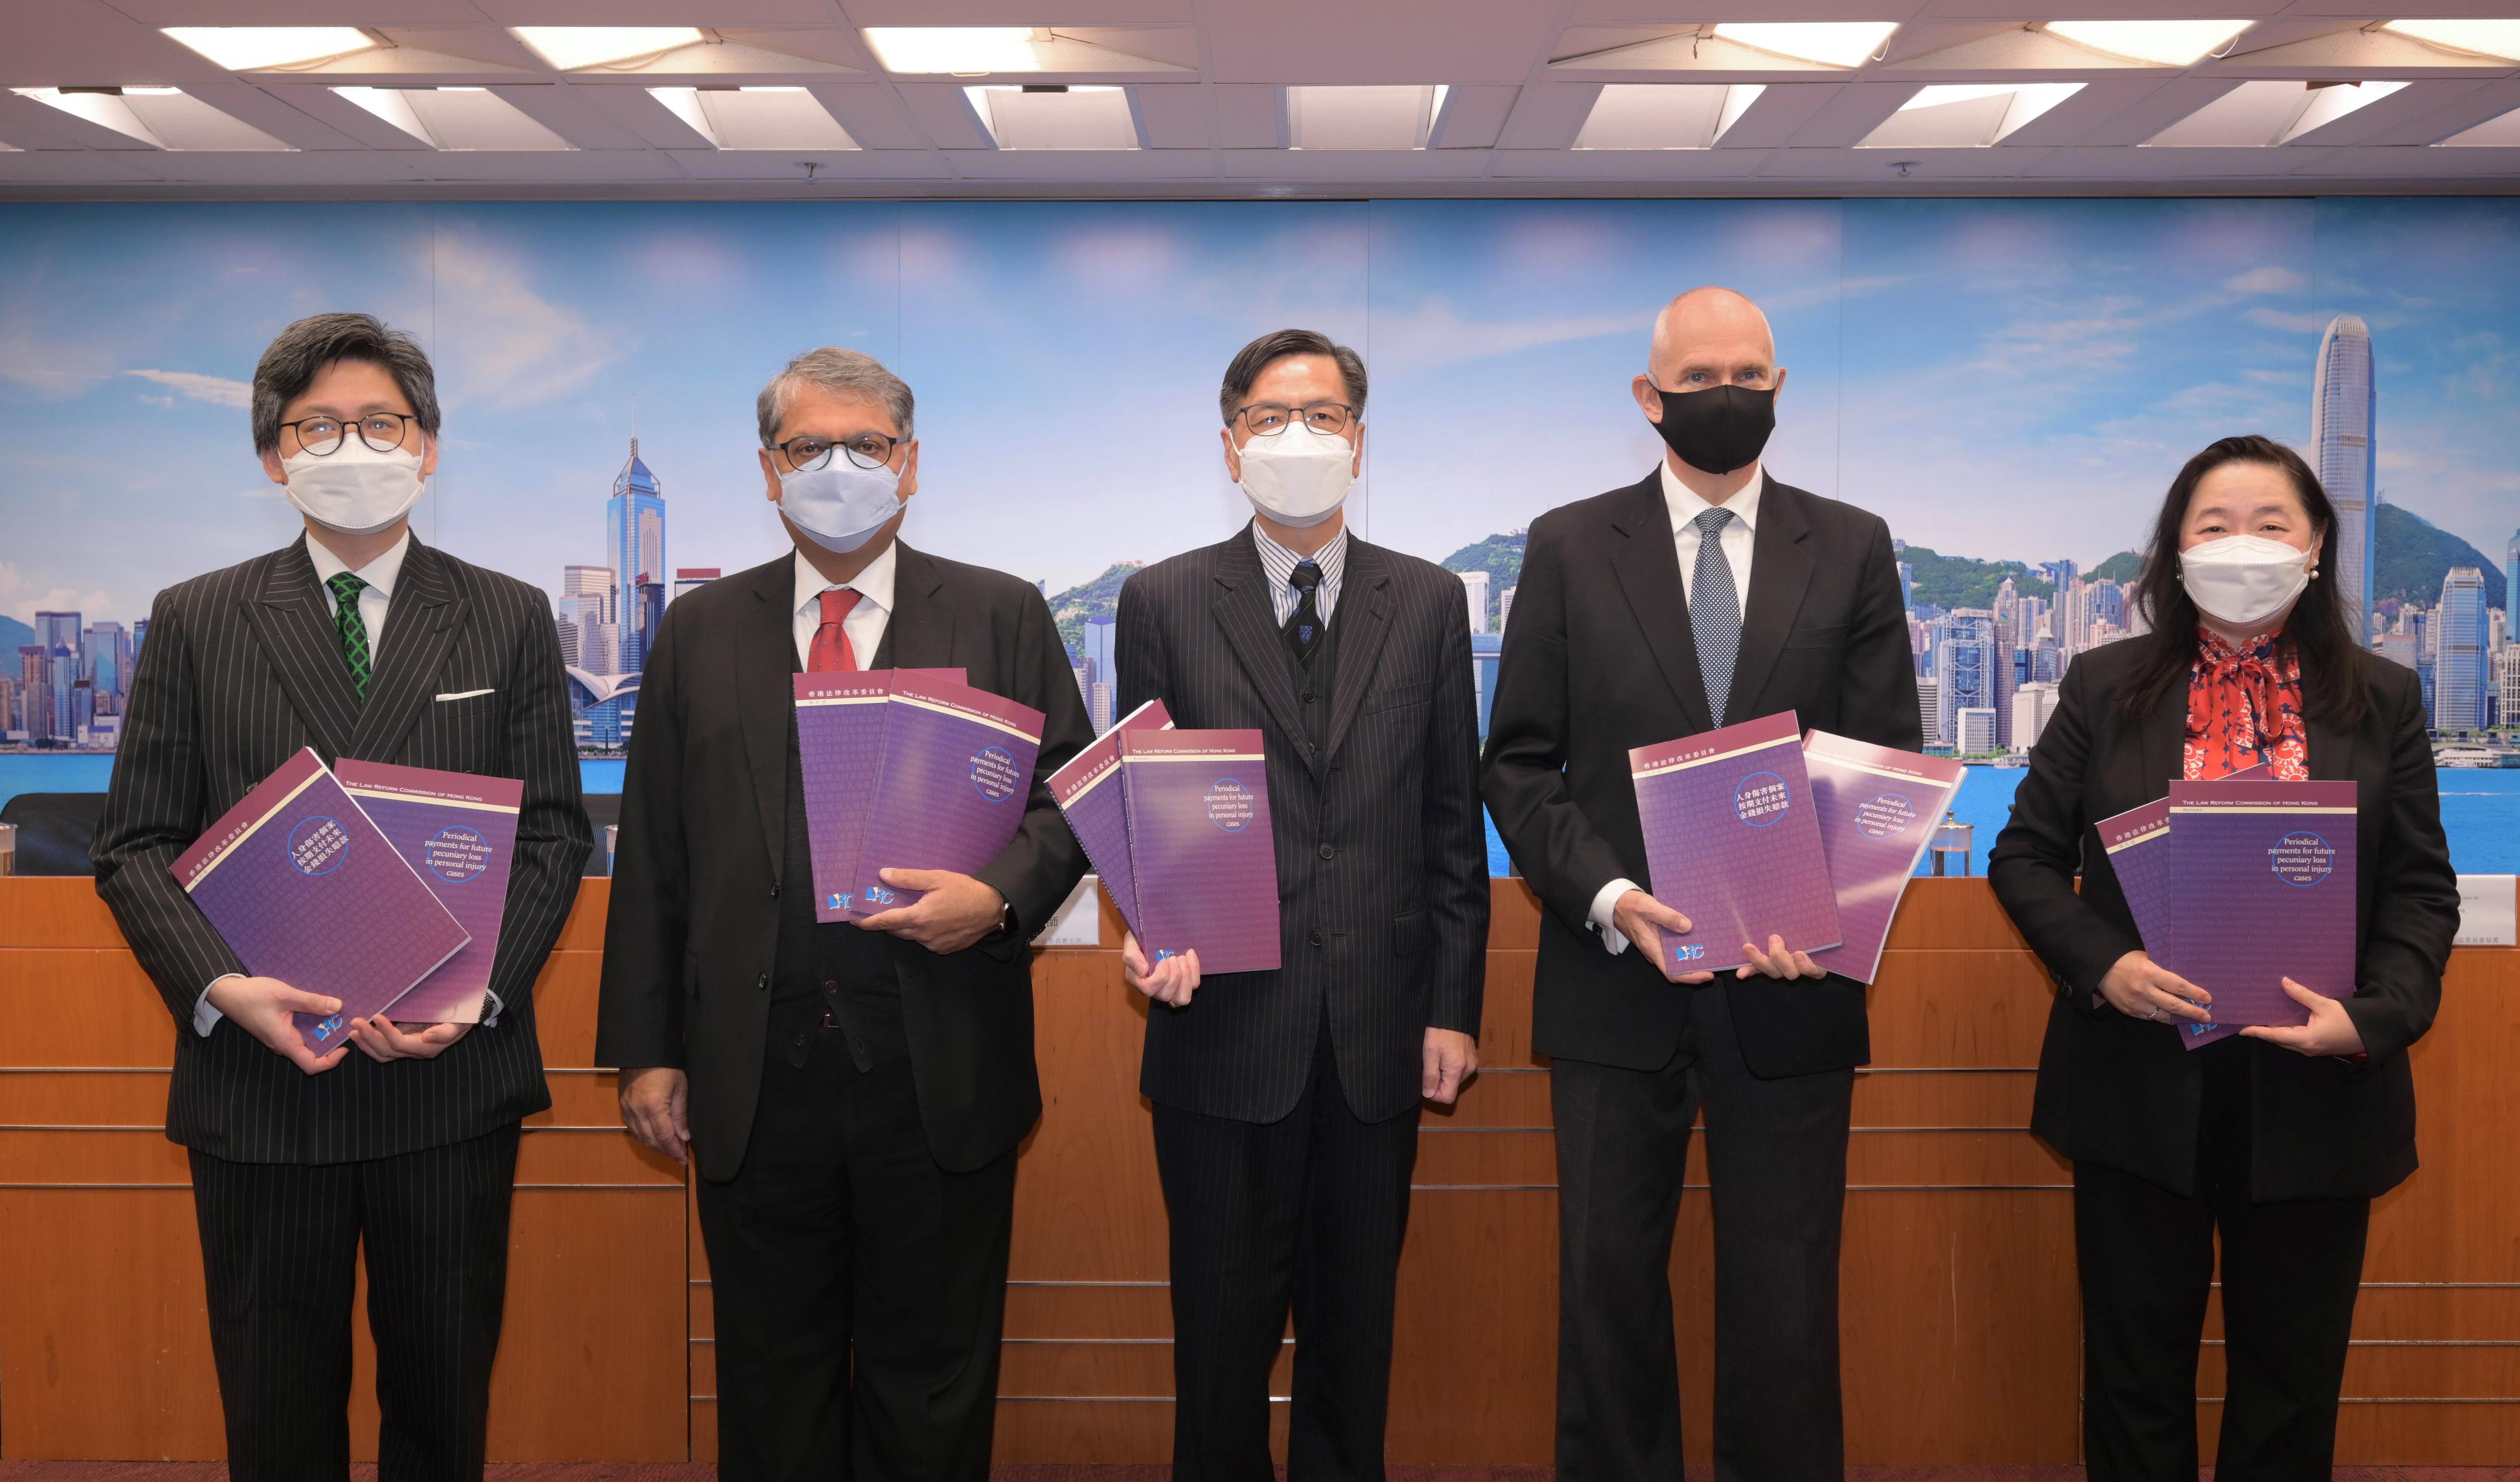 The Chairman of the Periodical Payments for Future Pecuniary Loss in Personal Injury Cases Sub-committee of the Law Reform Commission of Hong Kong (LRC), Mr Raymond Leung, SC (centre); members of the Sub-committee Mr Mohan Bharwaney, SC (second left) and Mr Mark Reeves (second right); the Secretary of the LRC, Mr Wesley Wong, SC (first left); and the Secretary to the Sub-committee, Ms Kitty Fung (first right), attend a press conference today (January 19) to release the report on Periodical Payments for Future Pecuniary Loss in Personal Injury Cases.